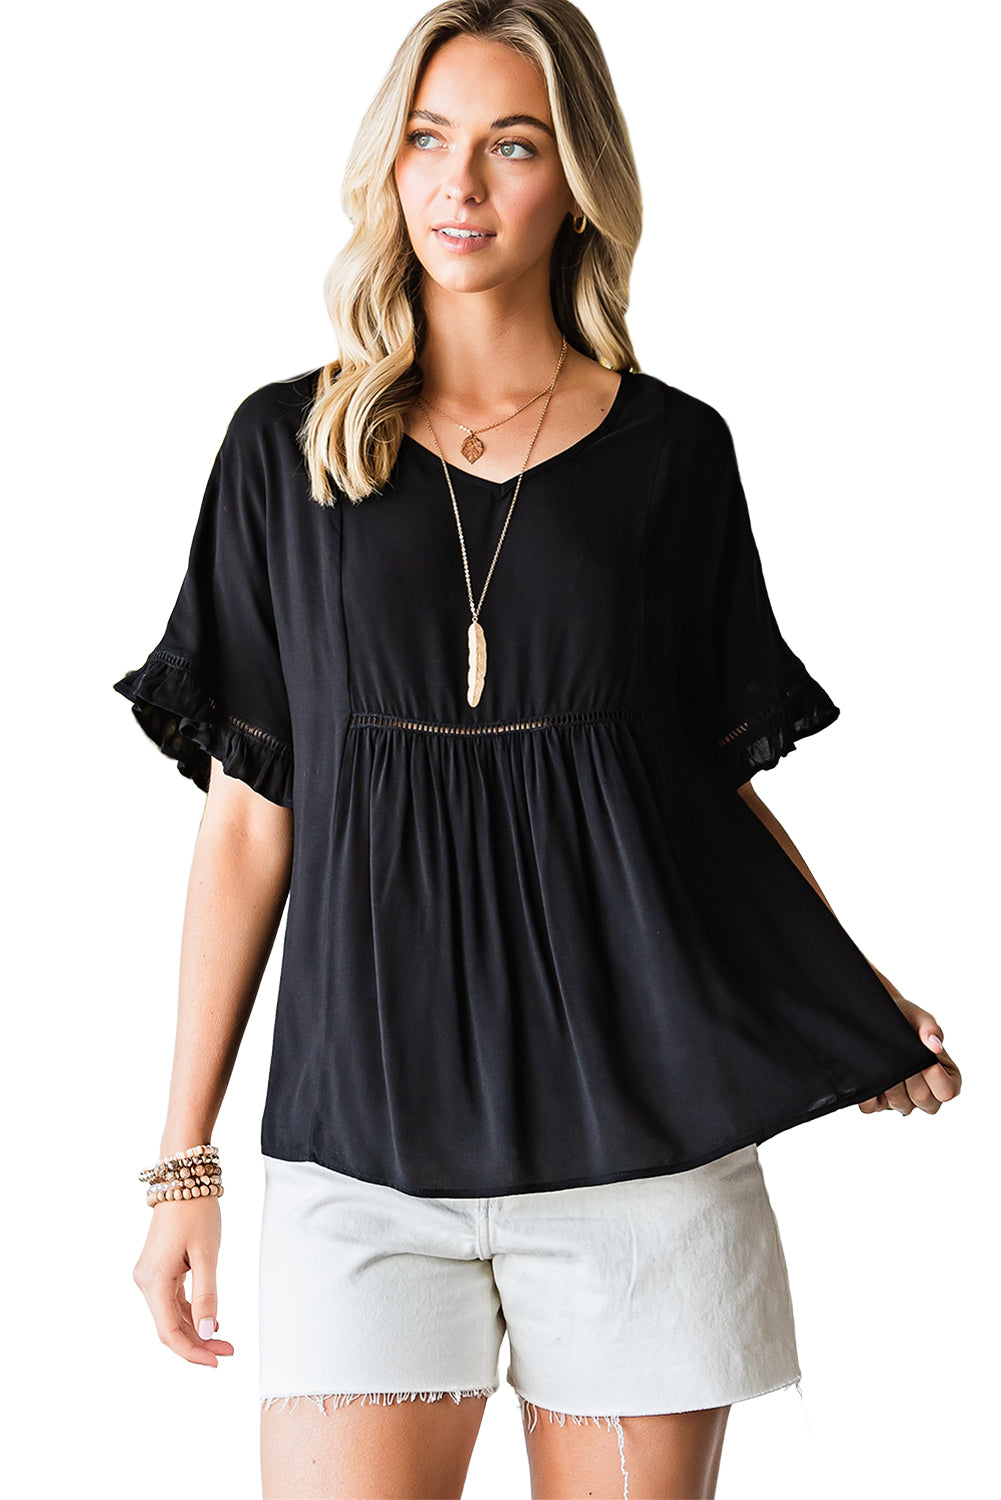 V-Neck Flounce Sleeve Babydoll Blouse - Women’s Clothing & Accessories - Shirts & Tops - 5 - 2024